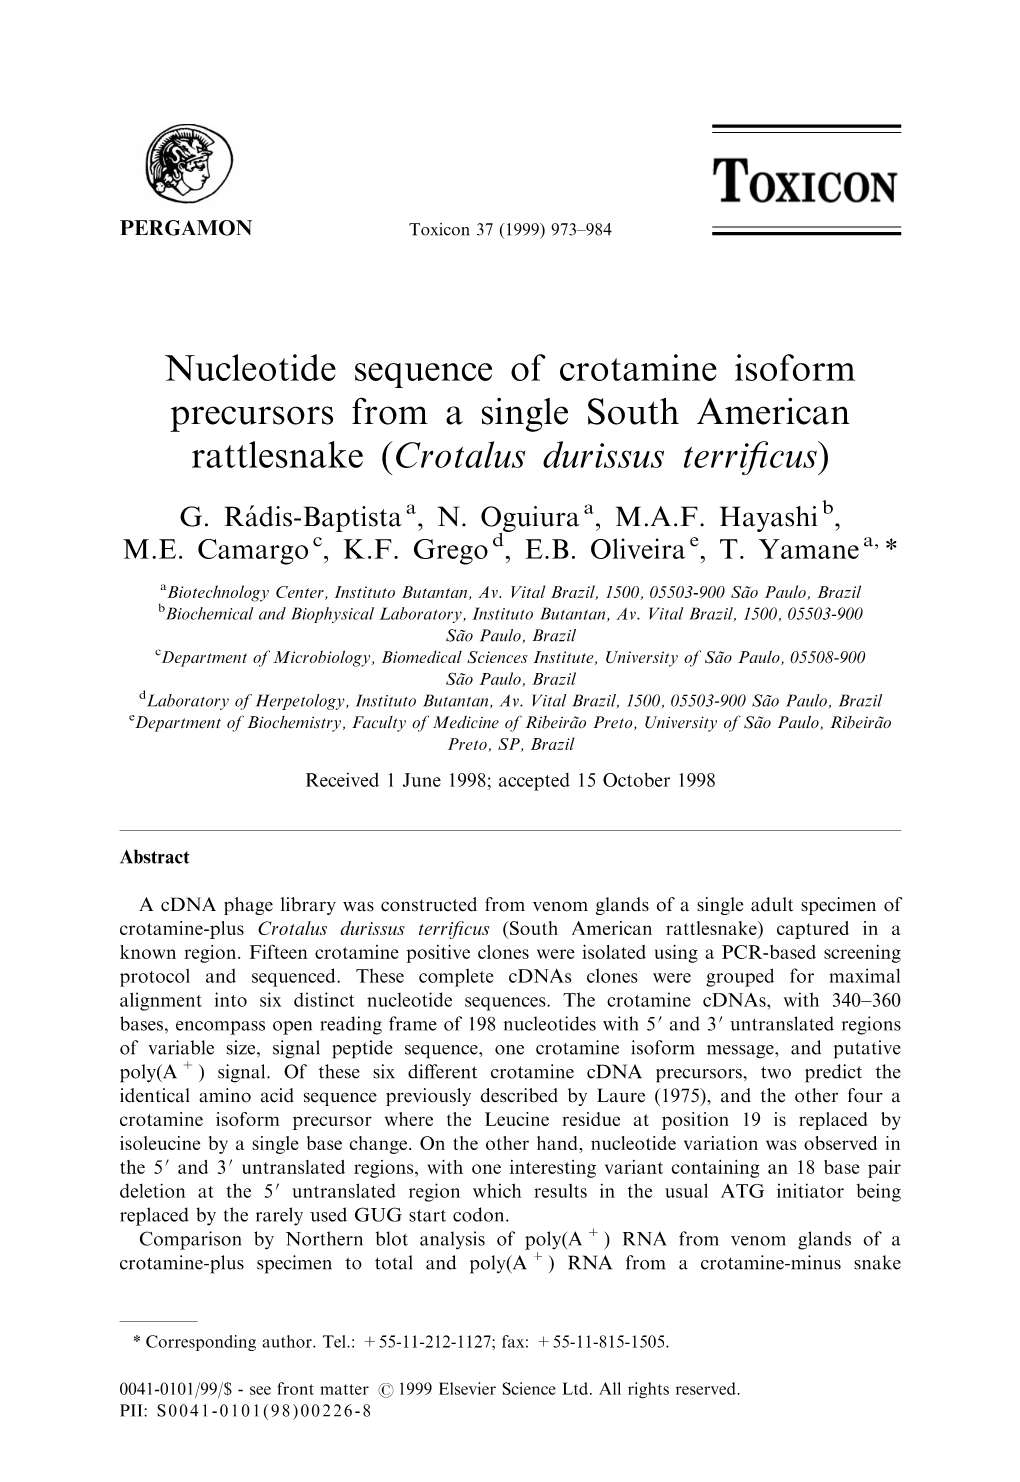 Nucleotide Sequence of Crotamine Isoform Precursors from a Single South American Rattlesnake (Crotalus Durissus Terri®Cus)